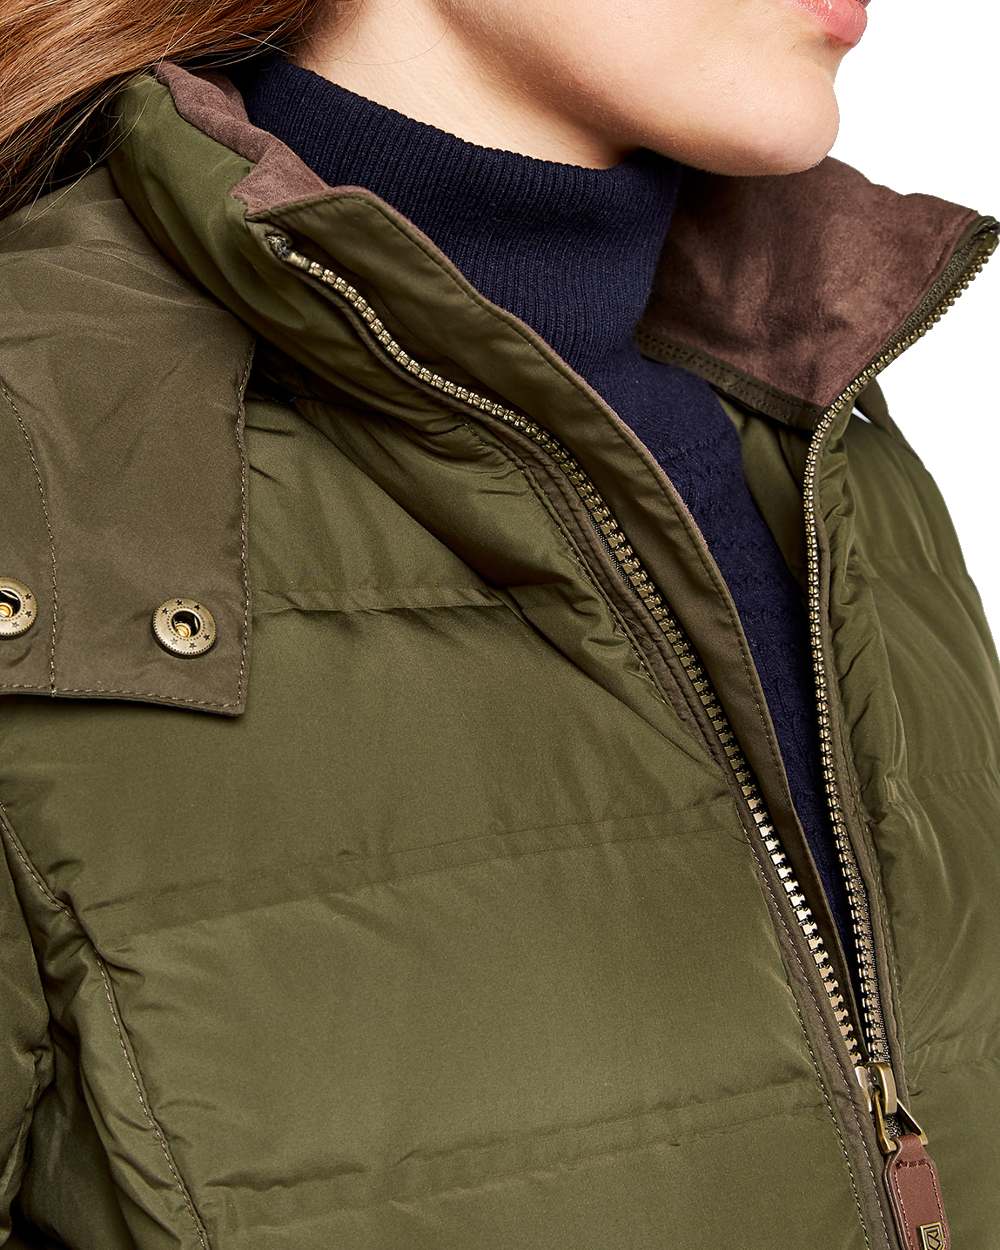 Dubarry Ballybrophy Quilted Jacket in Olive 